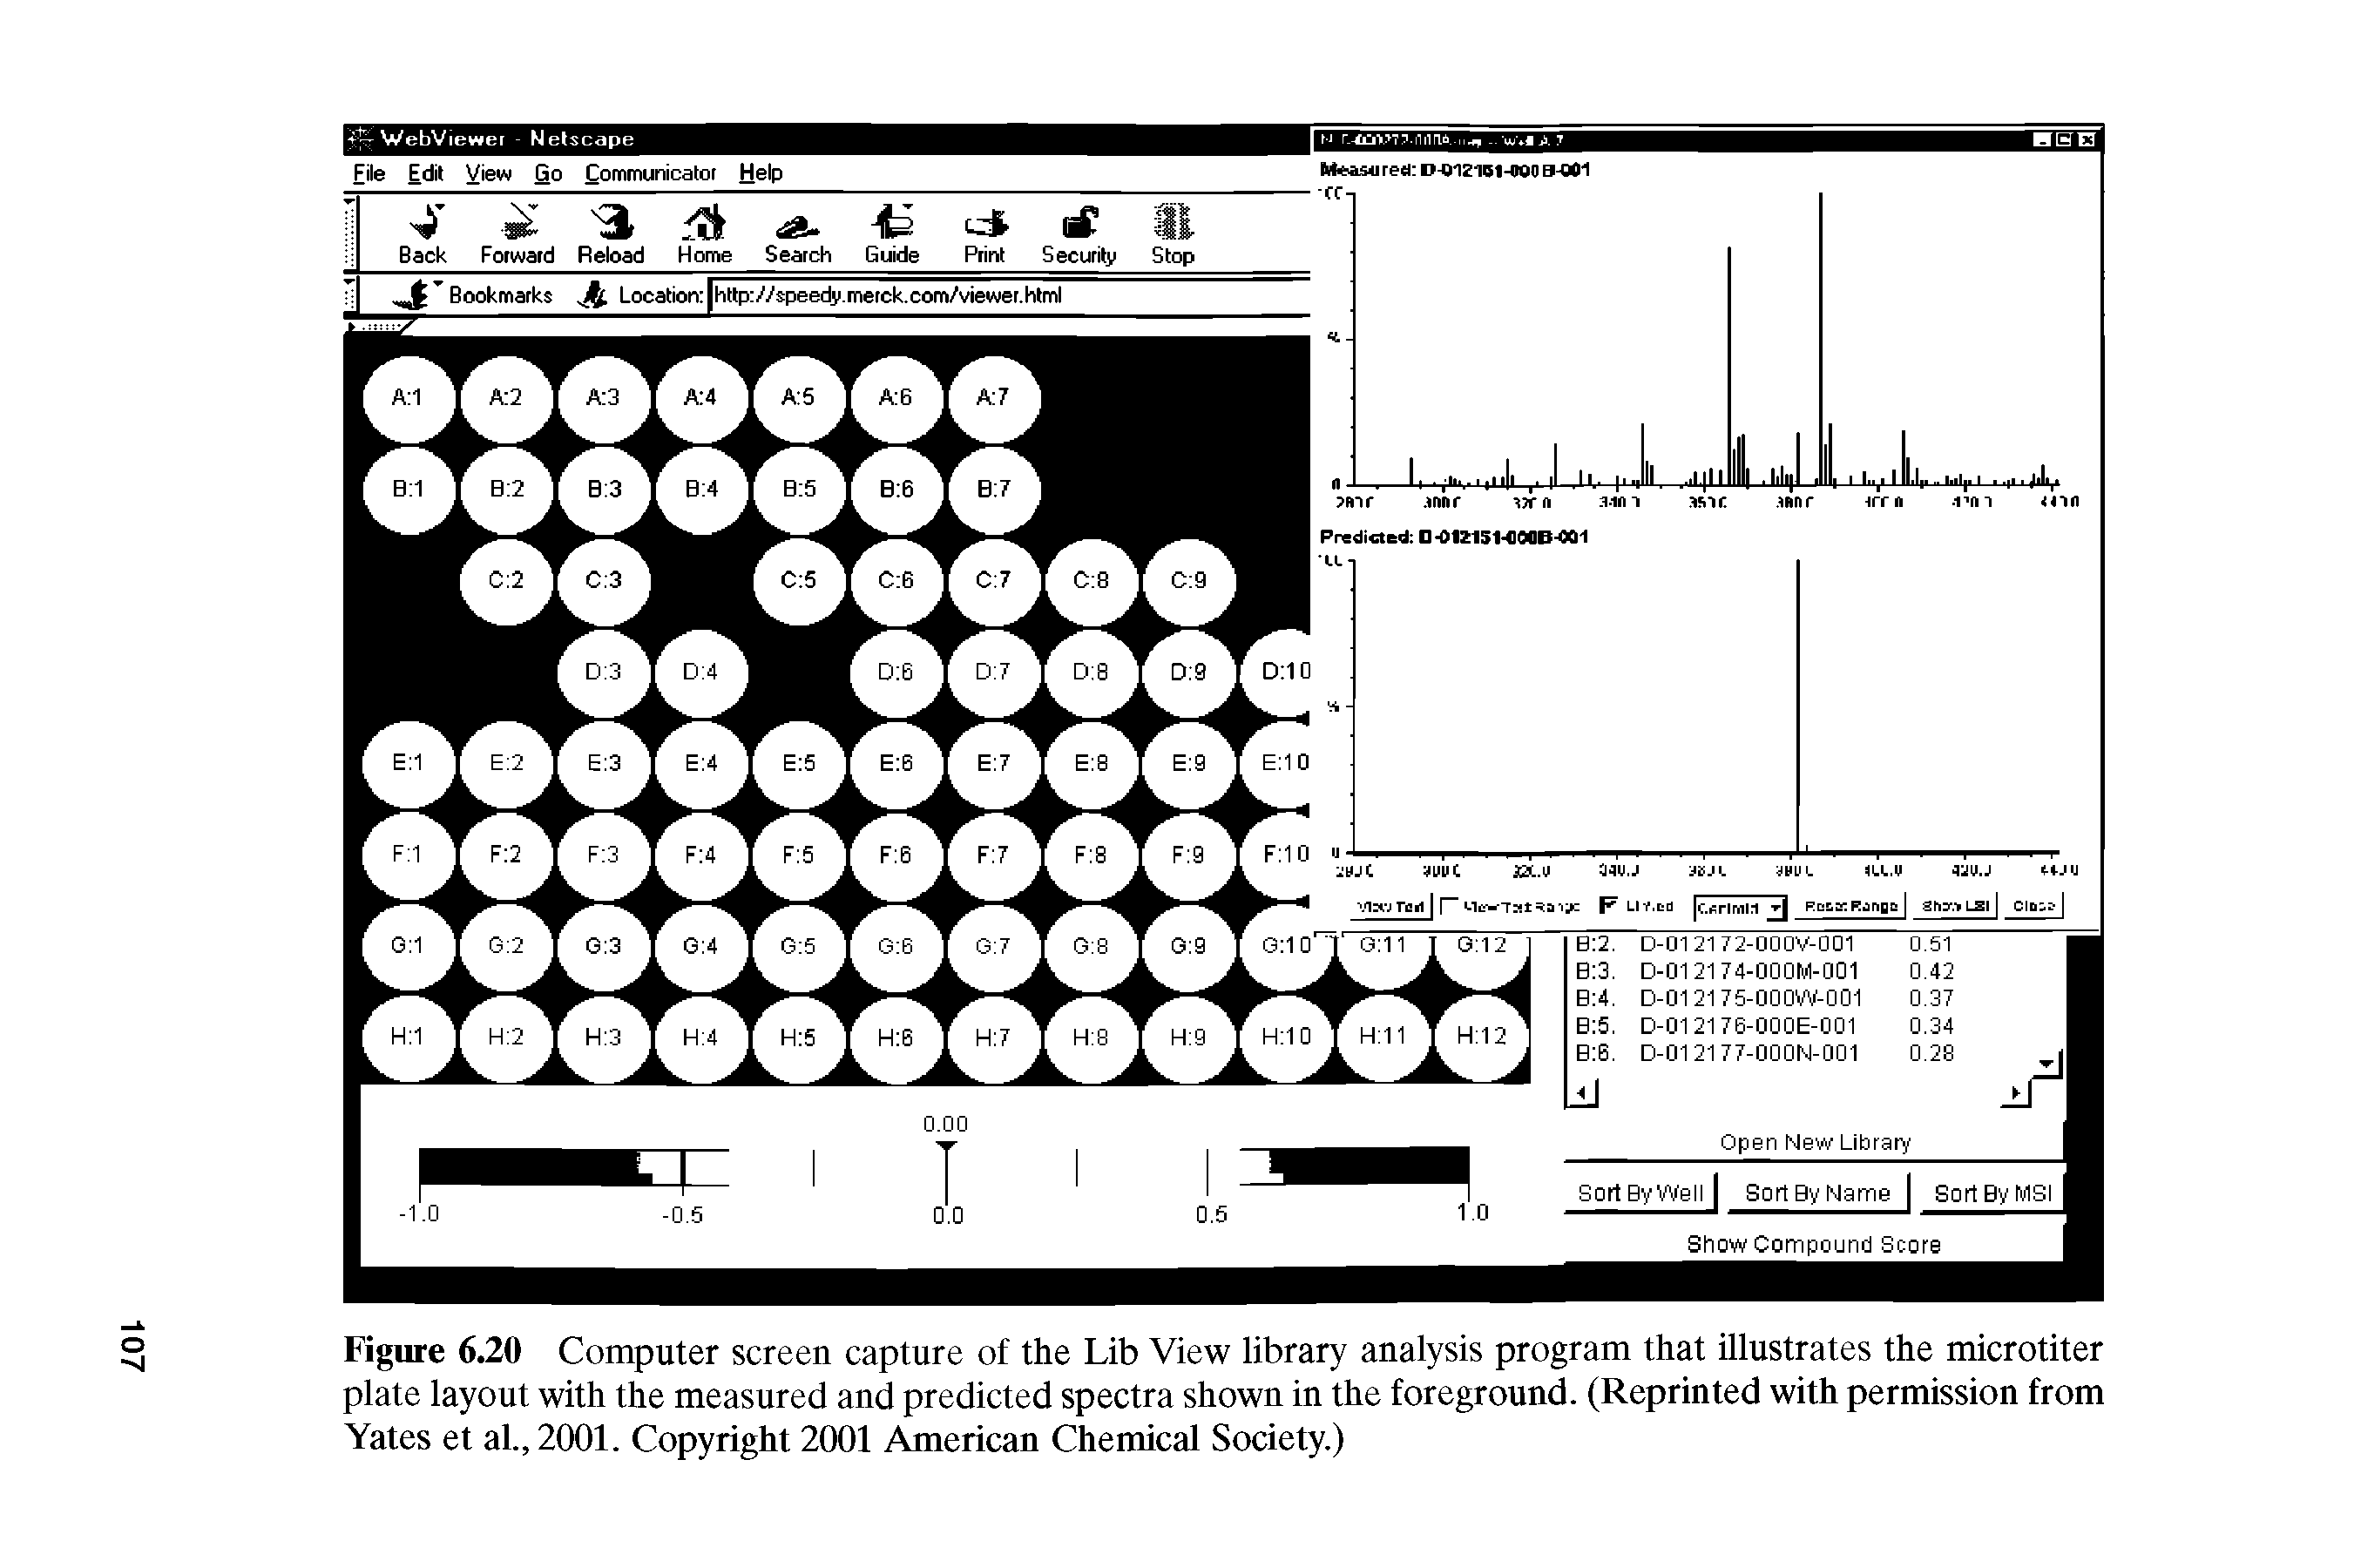 Figure 6.20 Computer screen capture of the Lib View library analysis program that illustrates the microtiter plate layout with the measured and predicted spectra shown in the foreground. (Reprinted with permission from Yates et al., 2001. Copyright 2001 American Chemical Society.)...